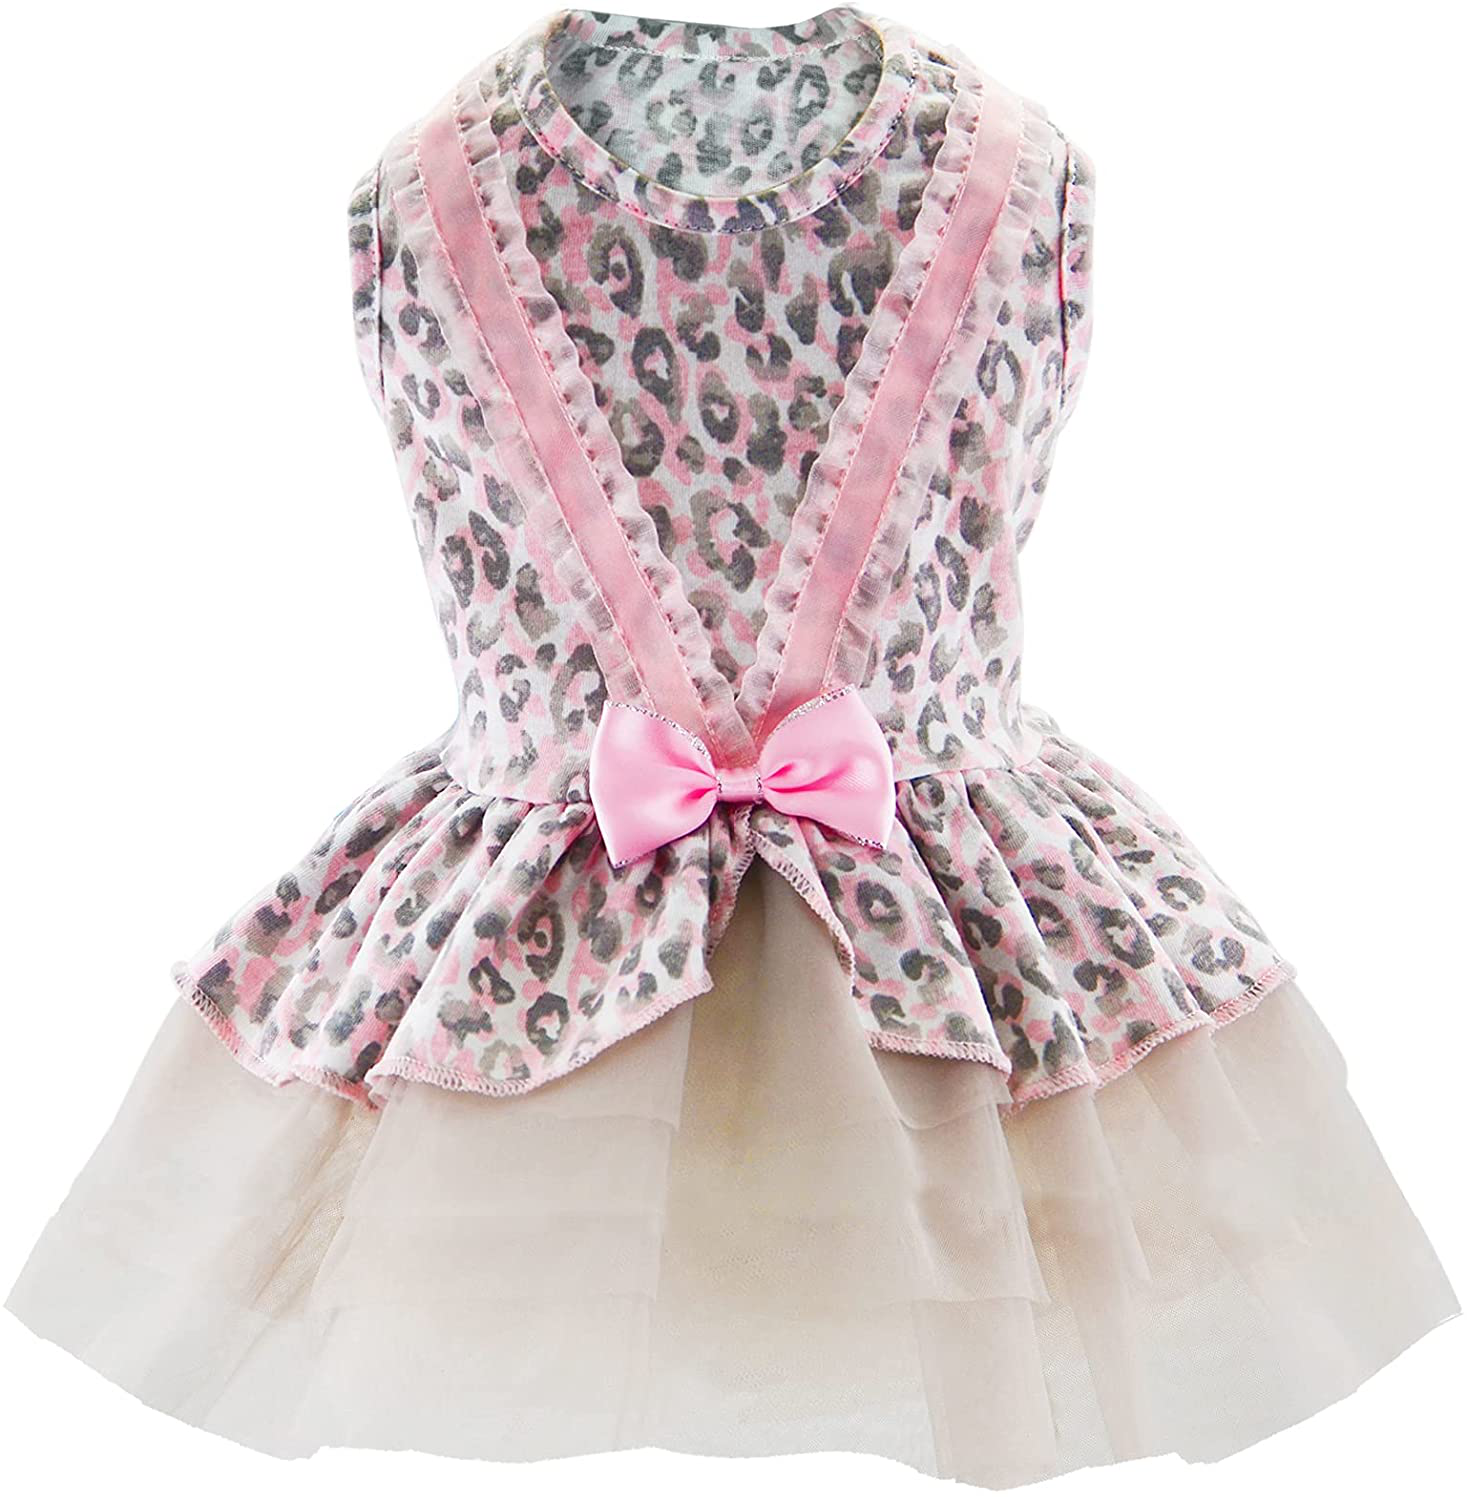 Small Dog Dress - Cute Dog Clothes Dog Tutus Dog Apparel Puppy Outfits Puppy Dresses for Girl Small Dogs (Pink Leopard, S(4.5-7Lb)) Animals & Pet Supplies > Pet Supplies > Dog Supplies > Dog Apparel JDIYMI Pink Leopard S(4.5-7lb) 